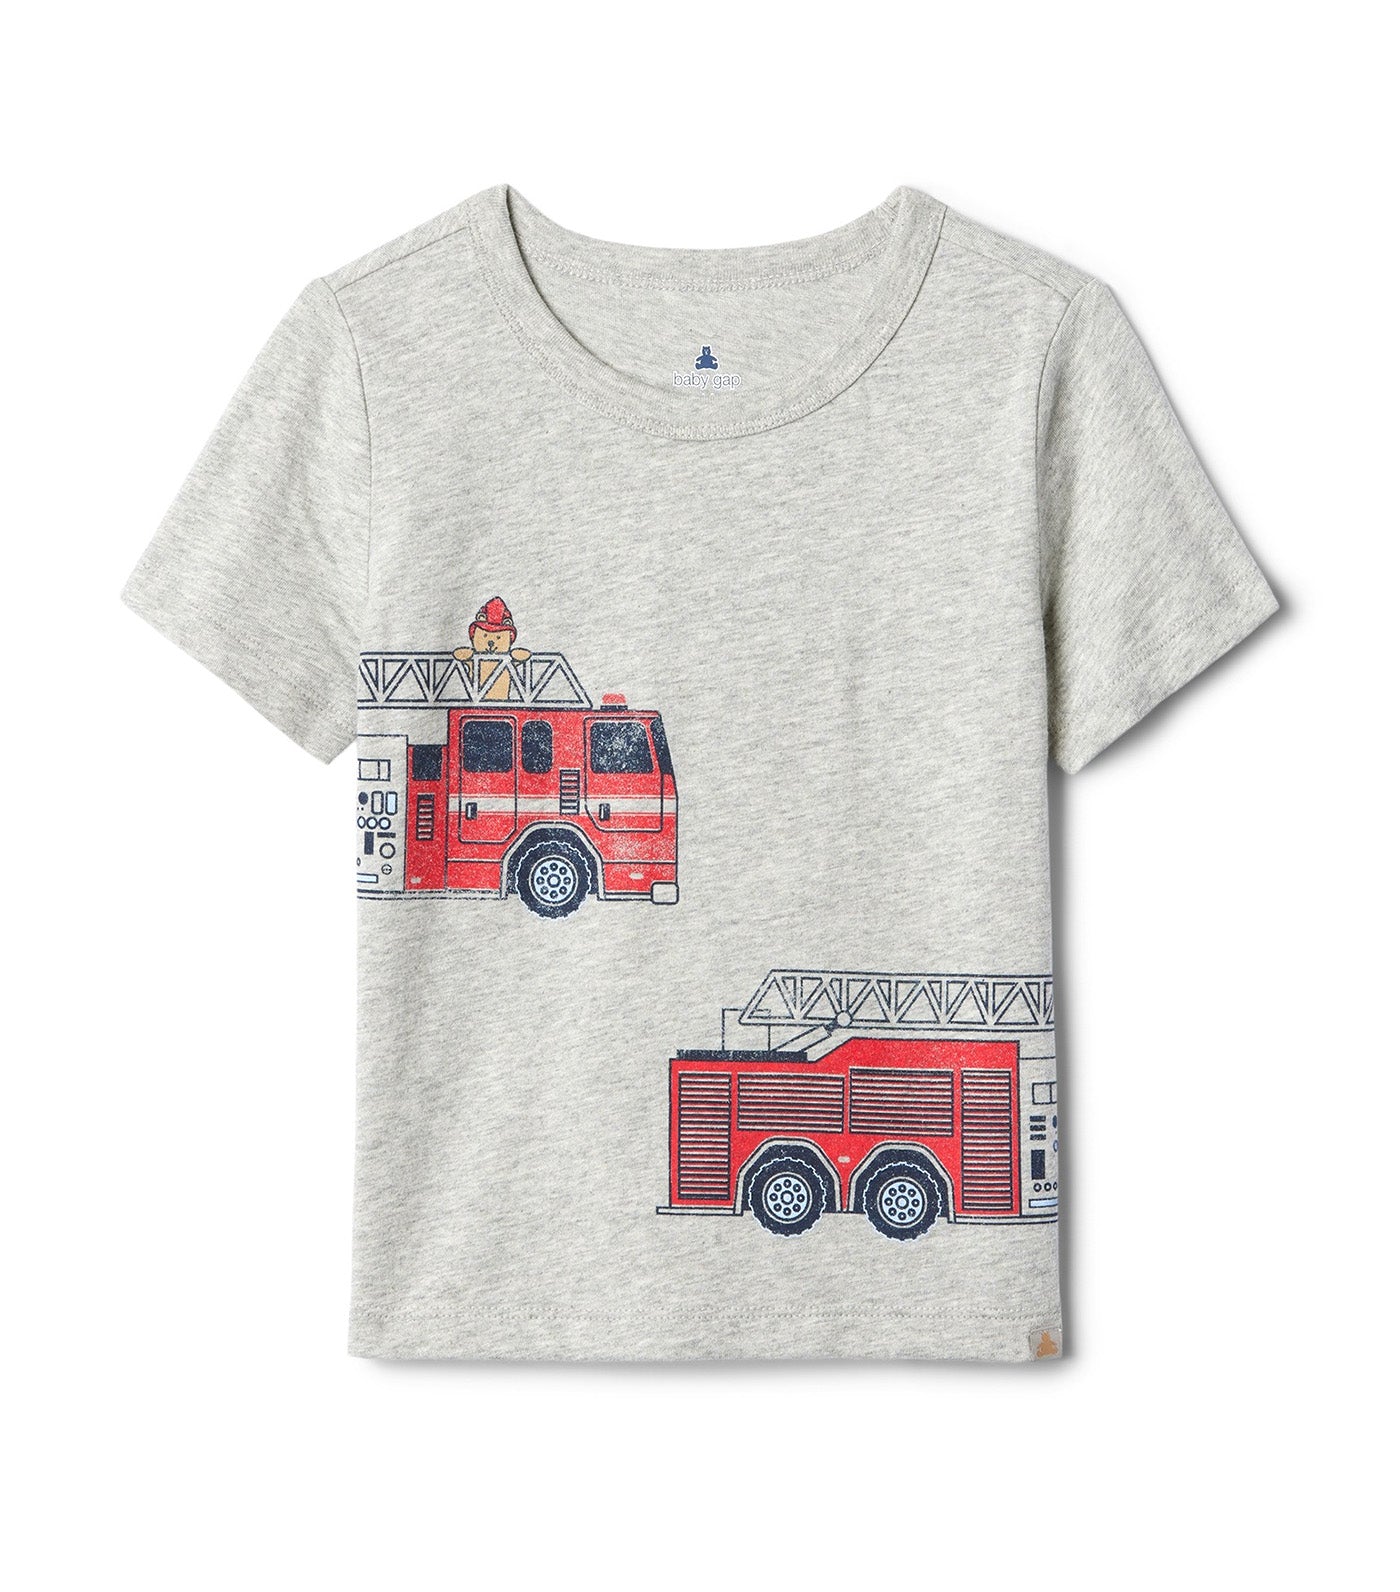 Toddler Mix and Match Graphic T-Shirt B08